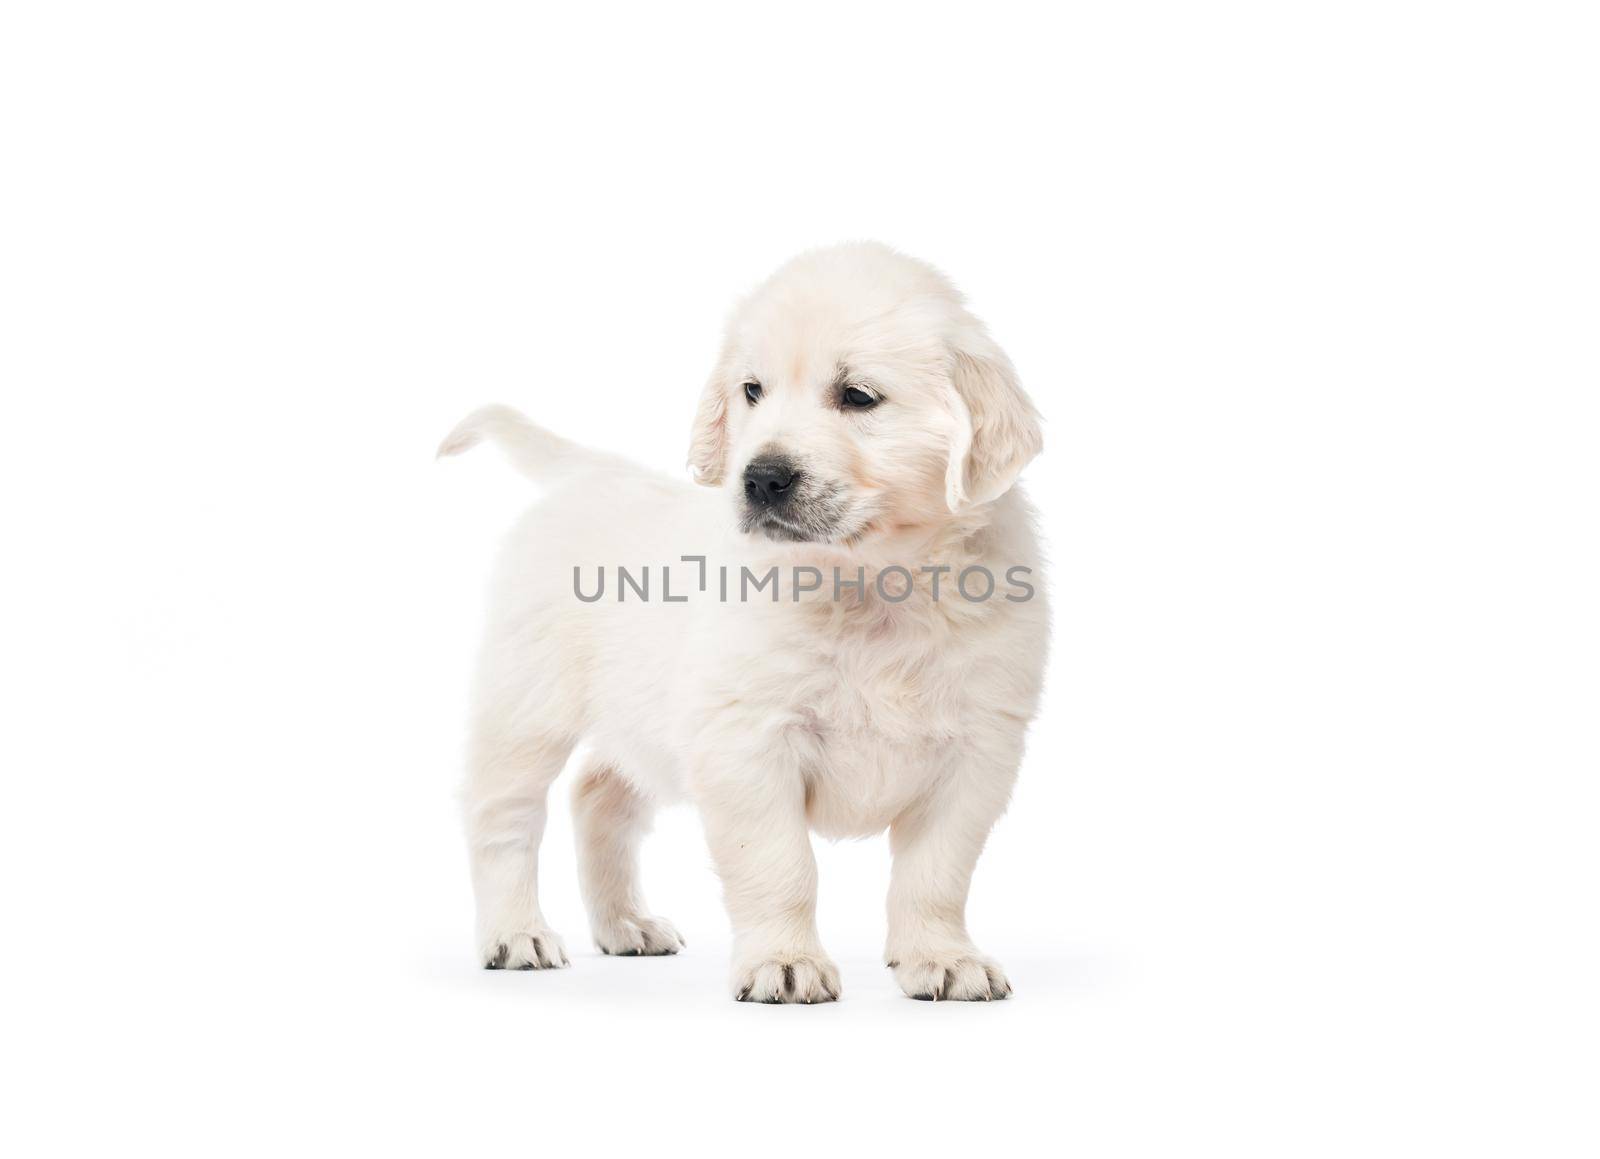 Little golden retriever puppy side view isolated on white background